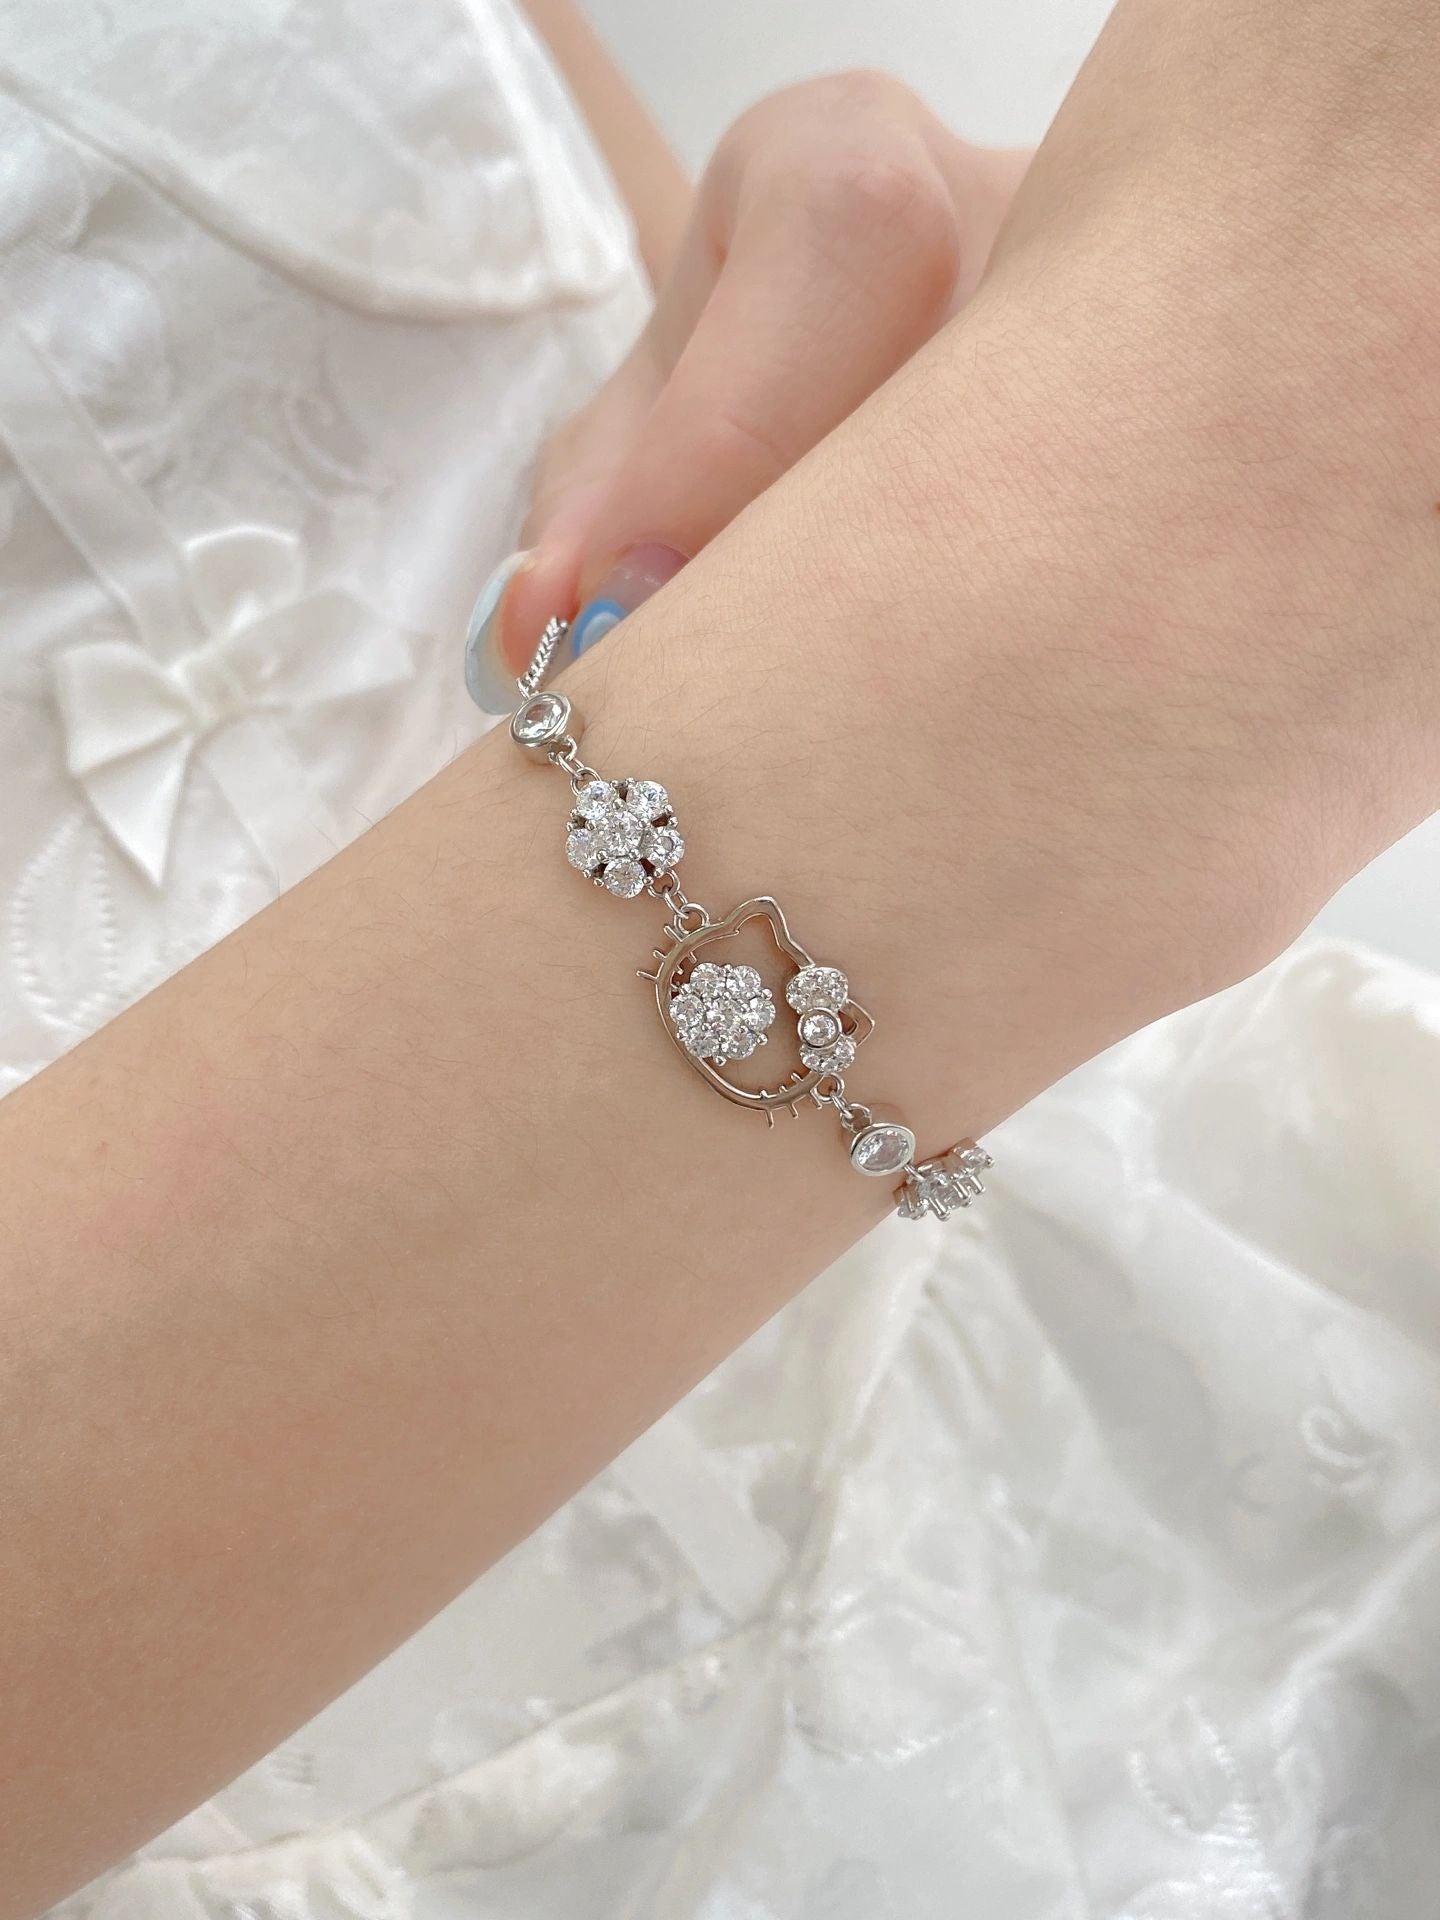 Hellokitty Sterling Silver Cute Bracelet with Crystal | Birthday Christmas Jewelry Gifts for Women Girls